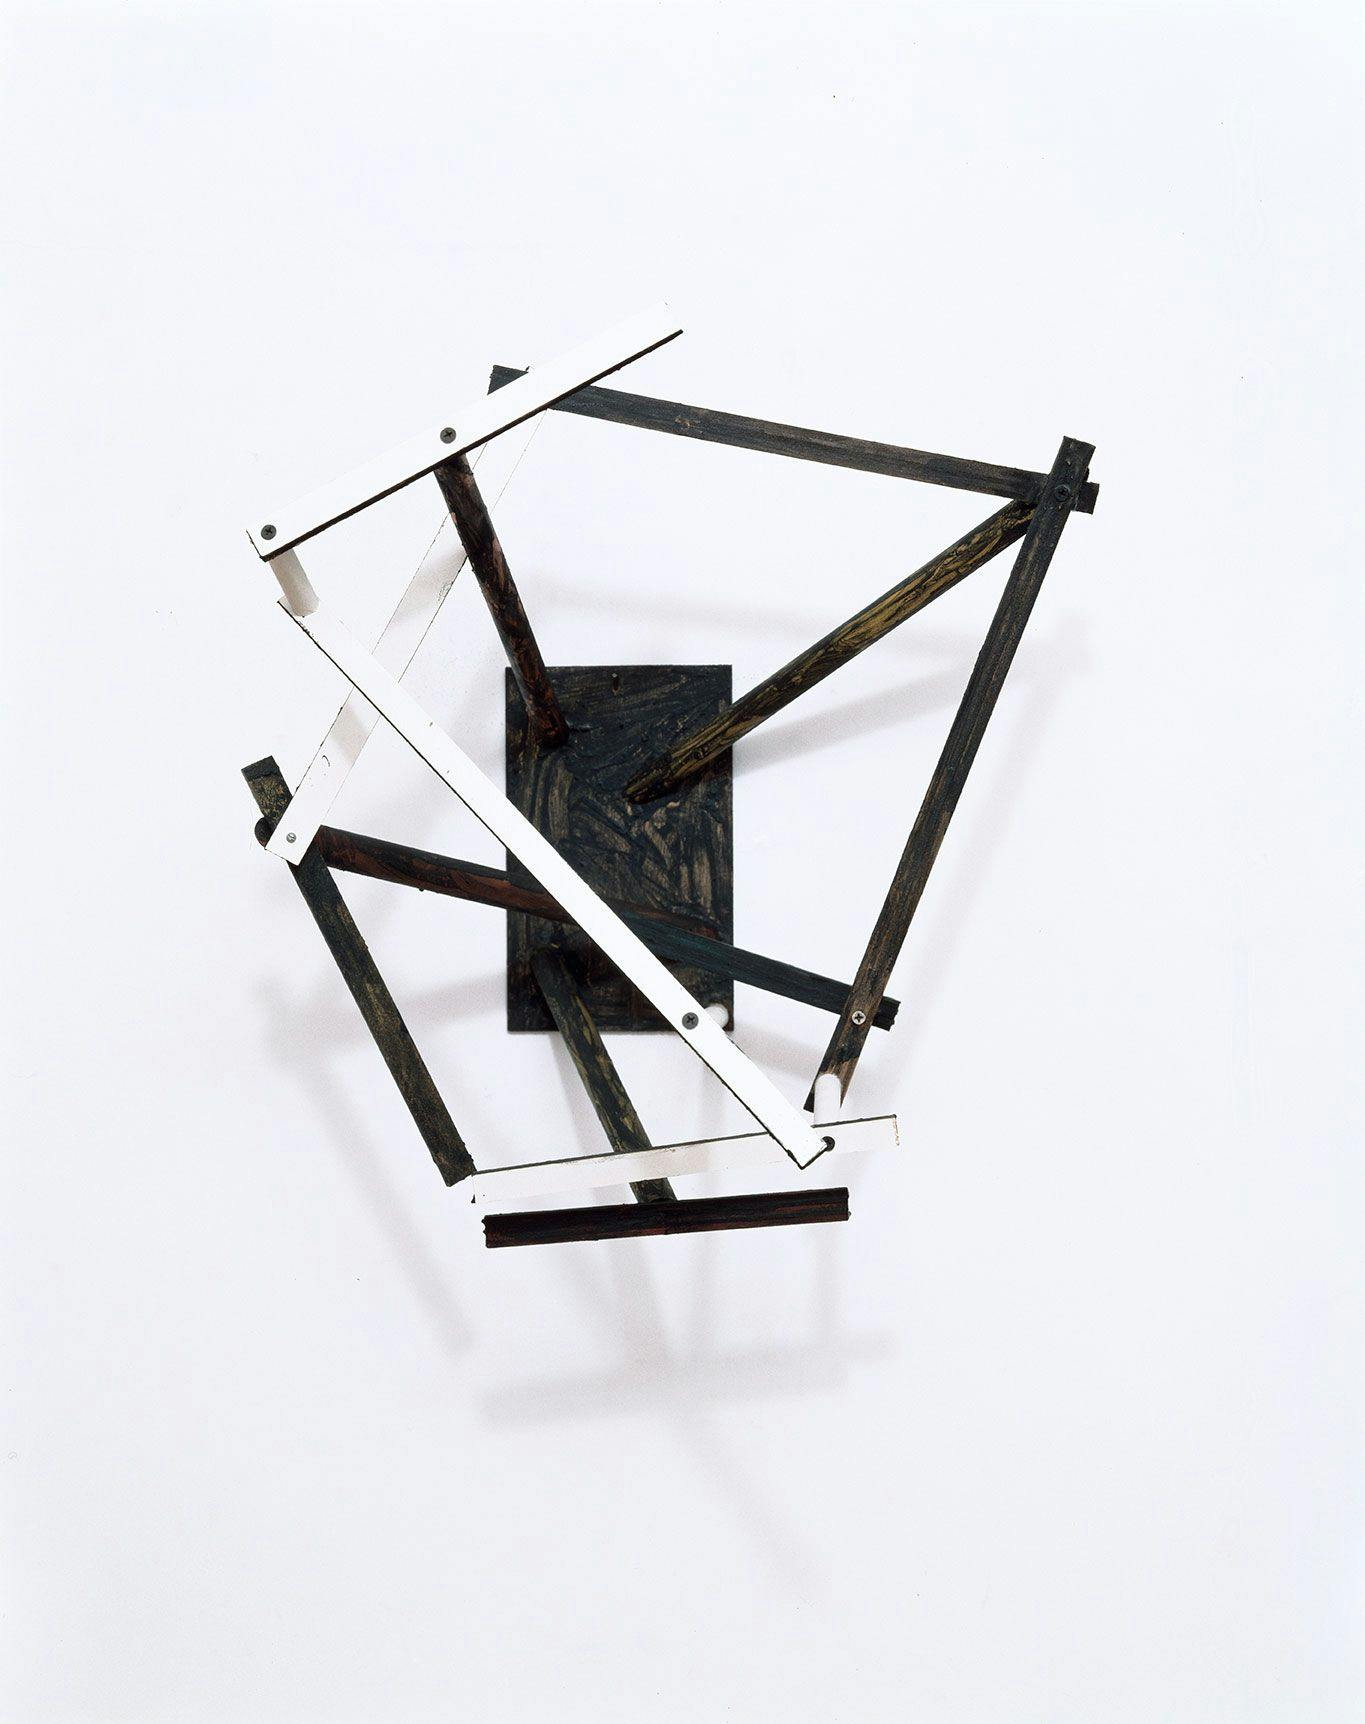 A mixed media sculpture by Al Taylor, titled Untitled (Broadcast), dated 1985.